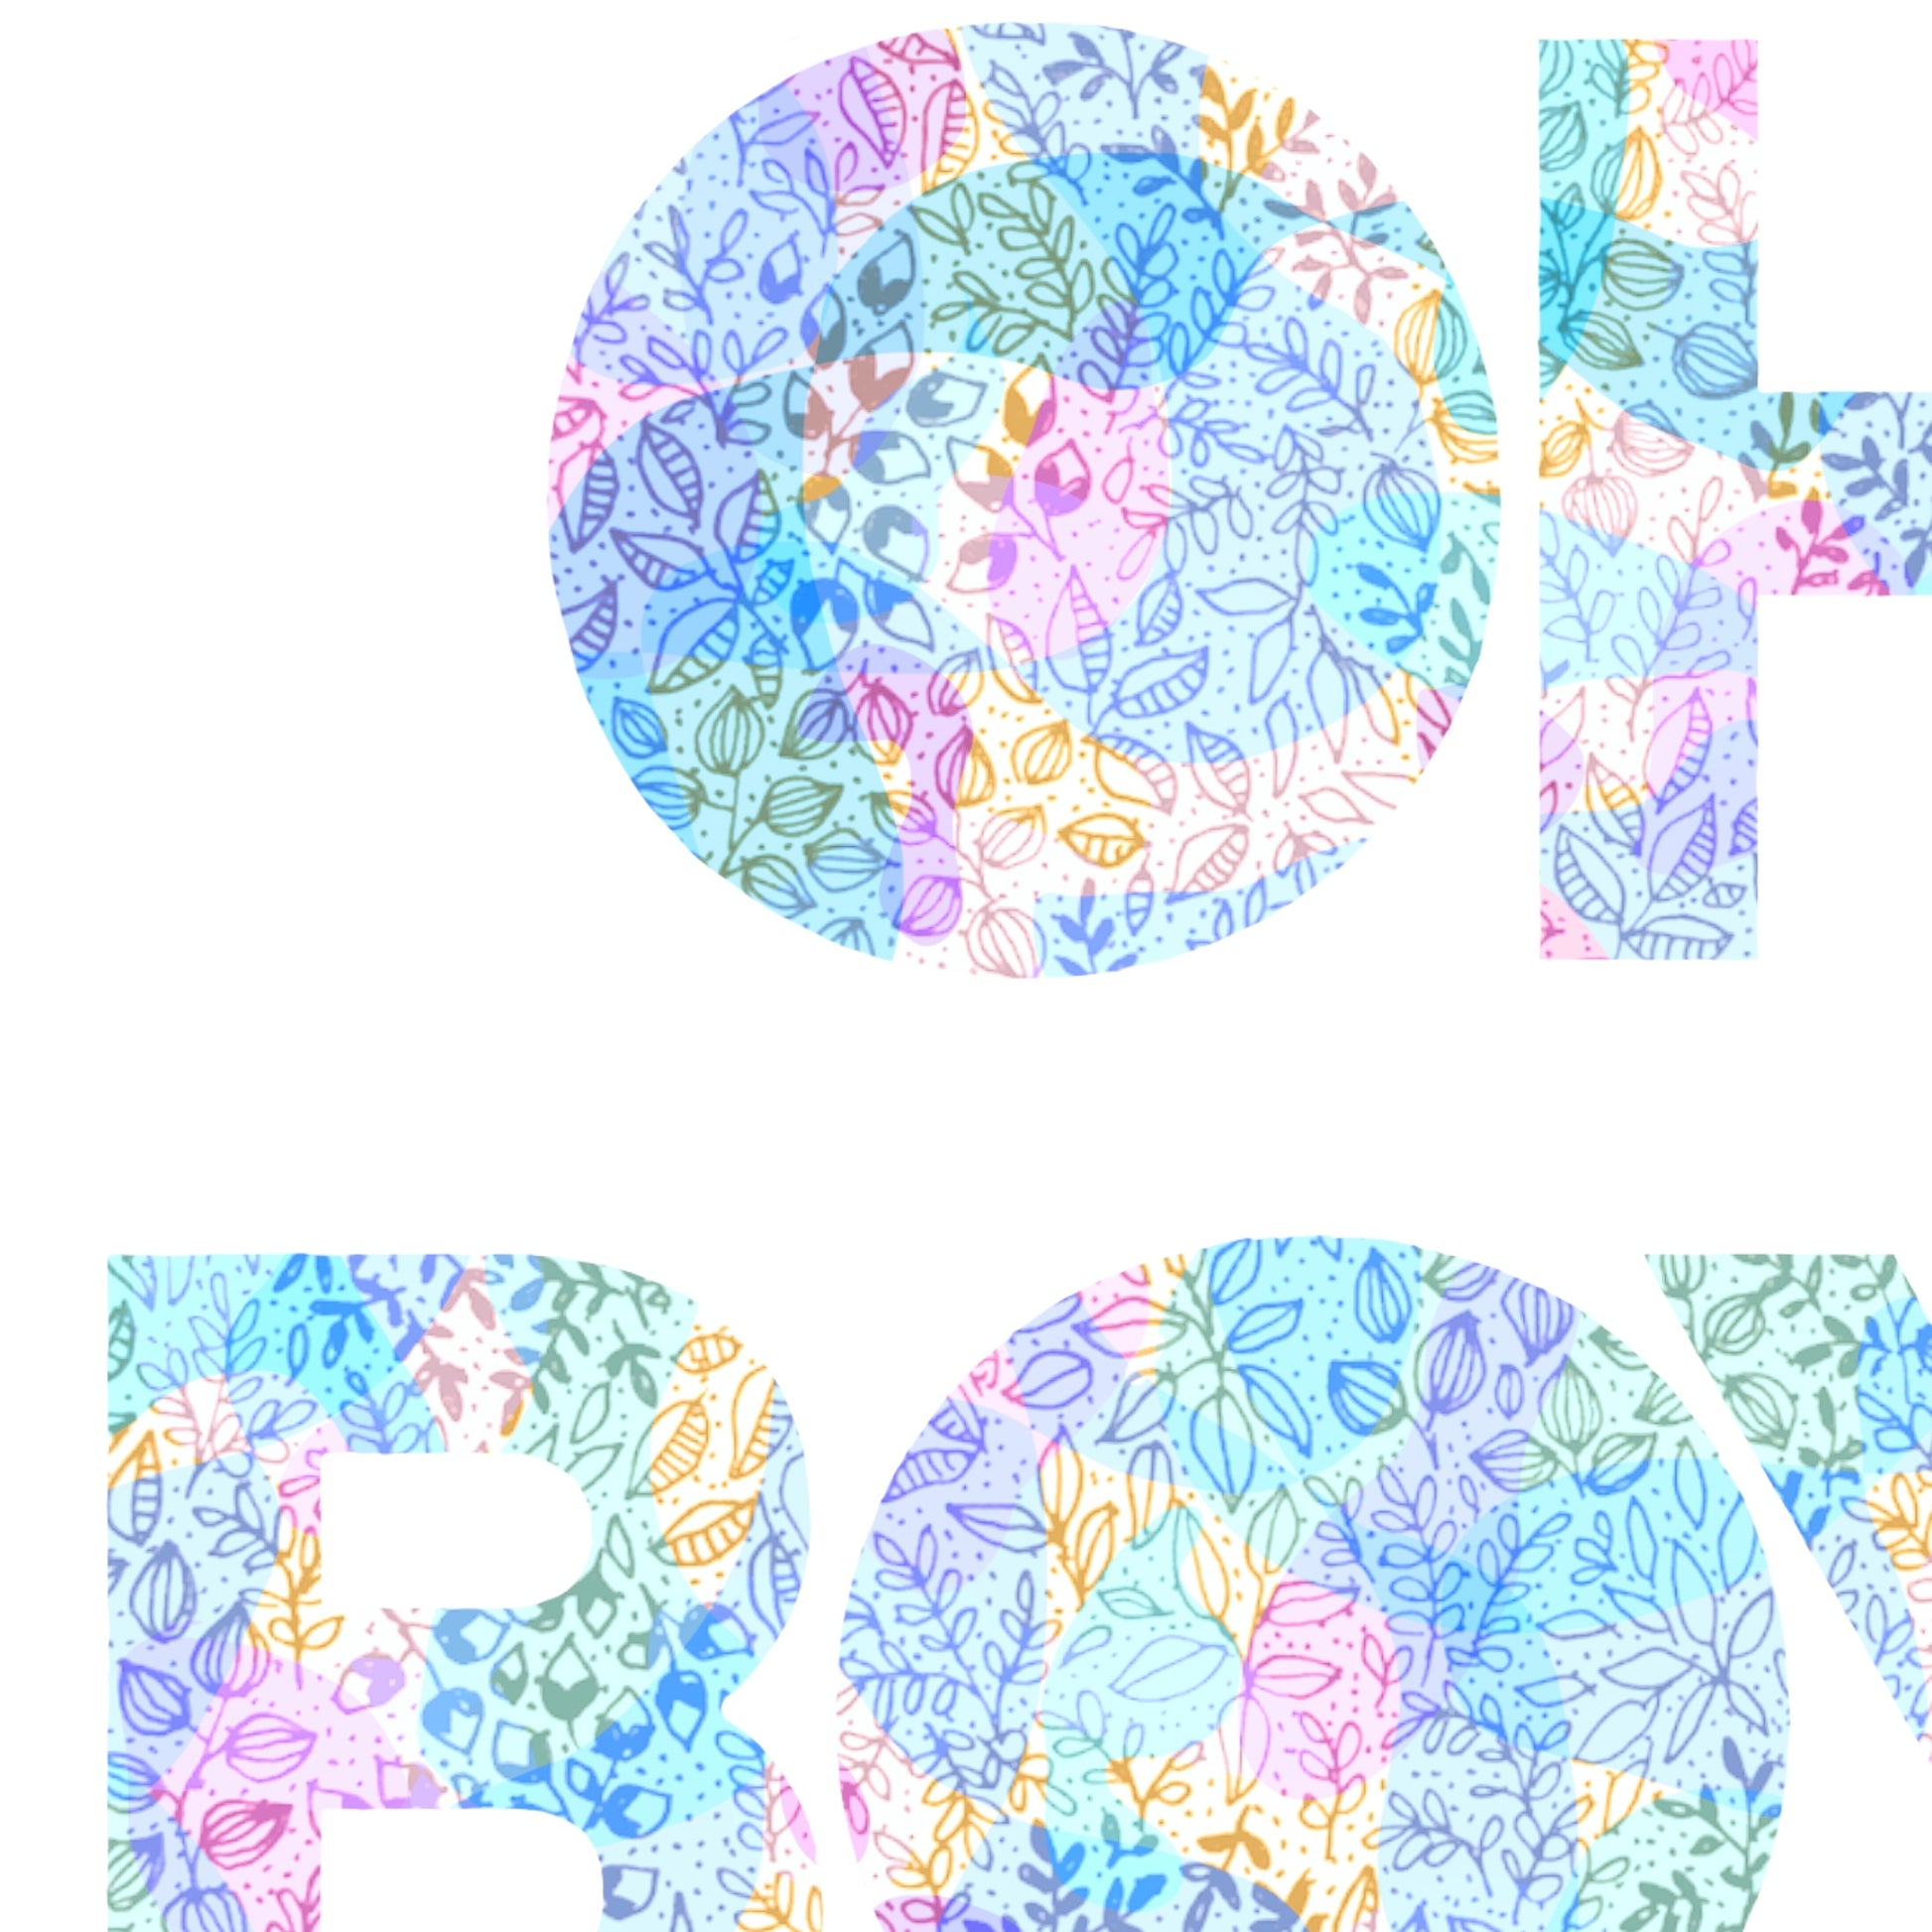 Image shows illustration of the saying OH BOY!. Image is multicoloured with the main colours being pink, blue, yellow, green and purple. Image is shown in a close up view to show the detail of the leaves that are drawn within the letters. 